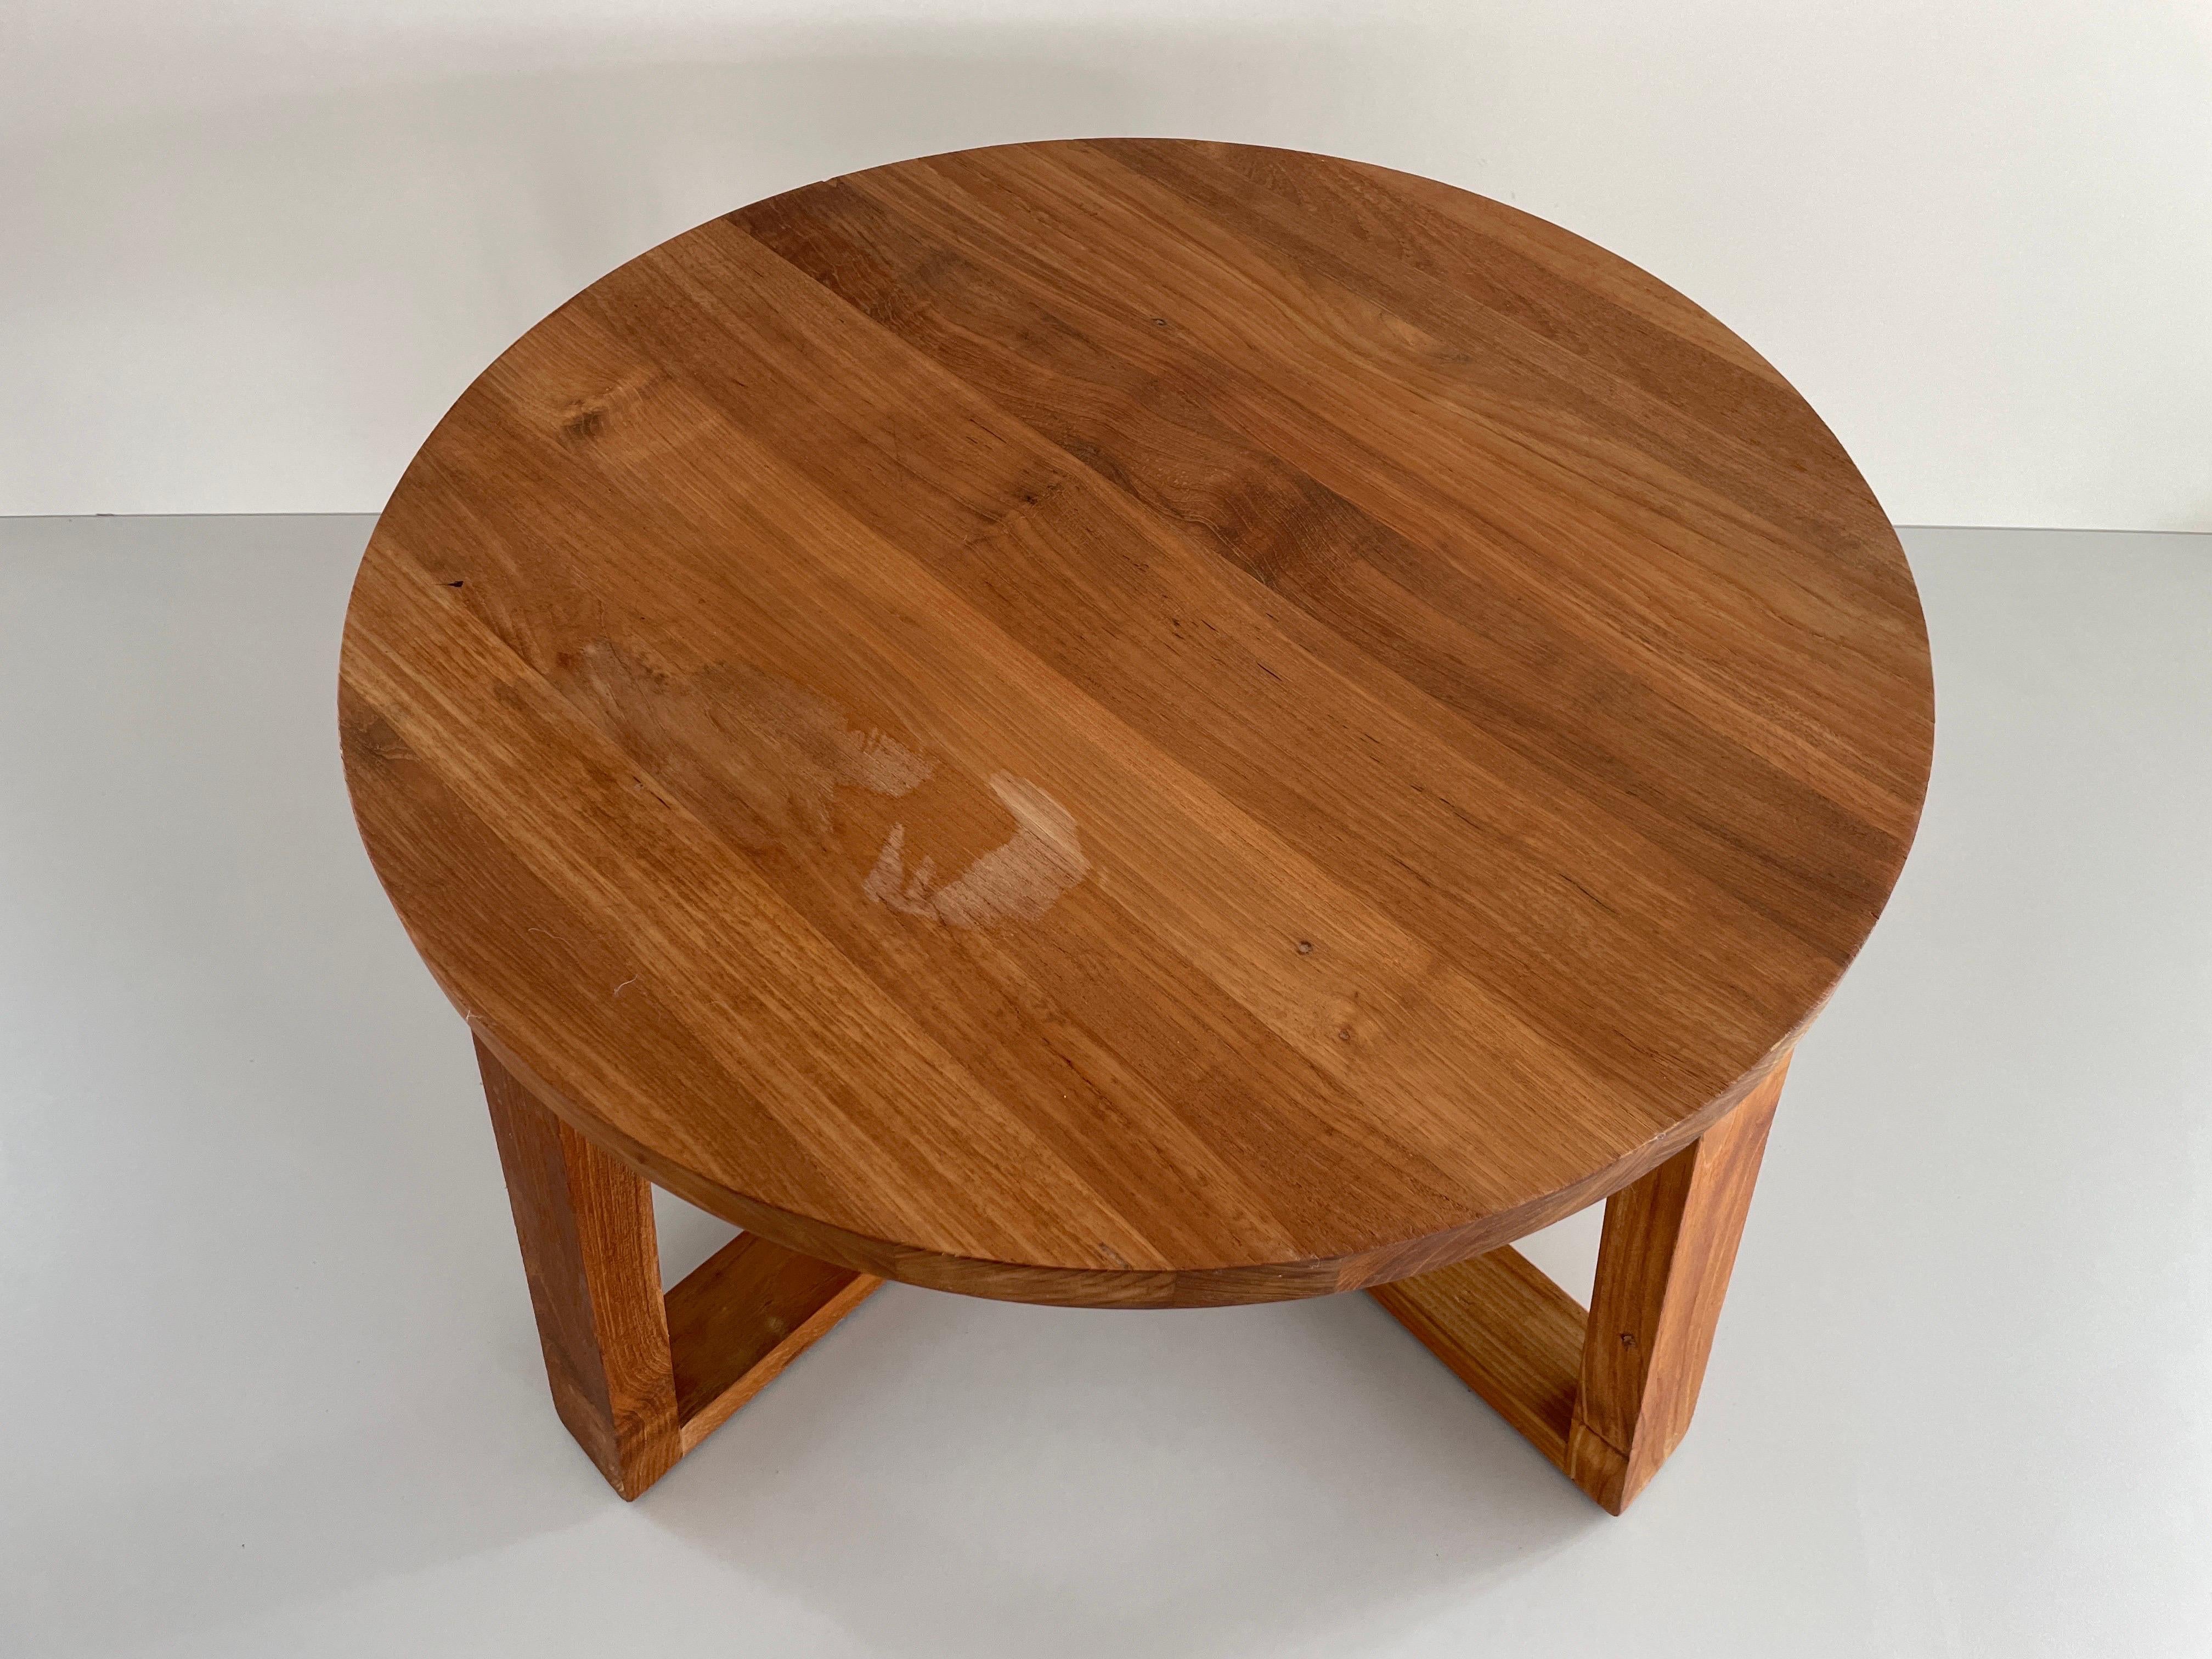 Minimalist Design Round Thick Wood Living Room Table, 1960s, Denmark 1